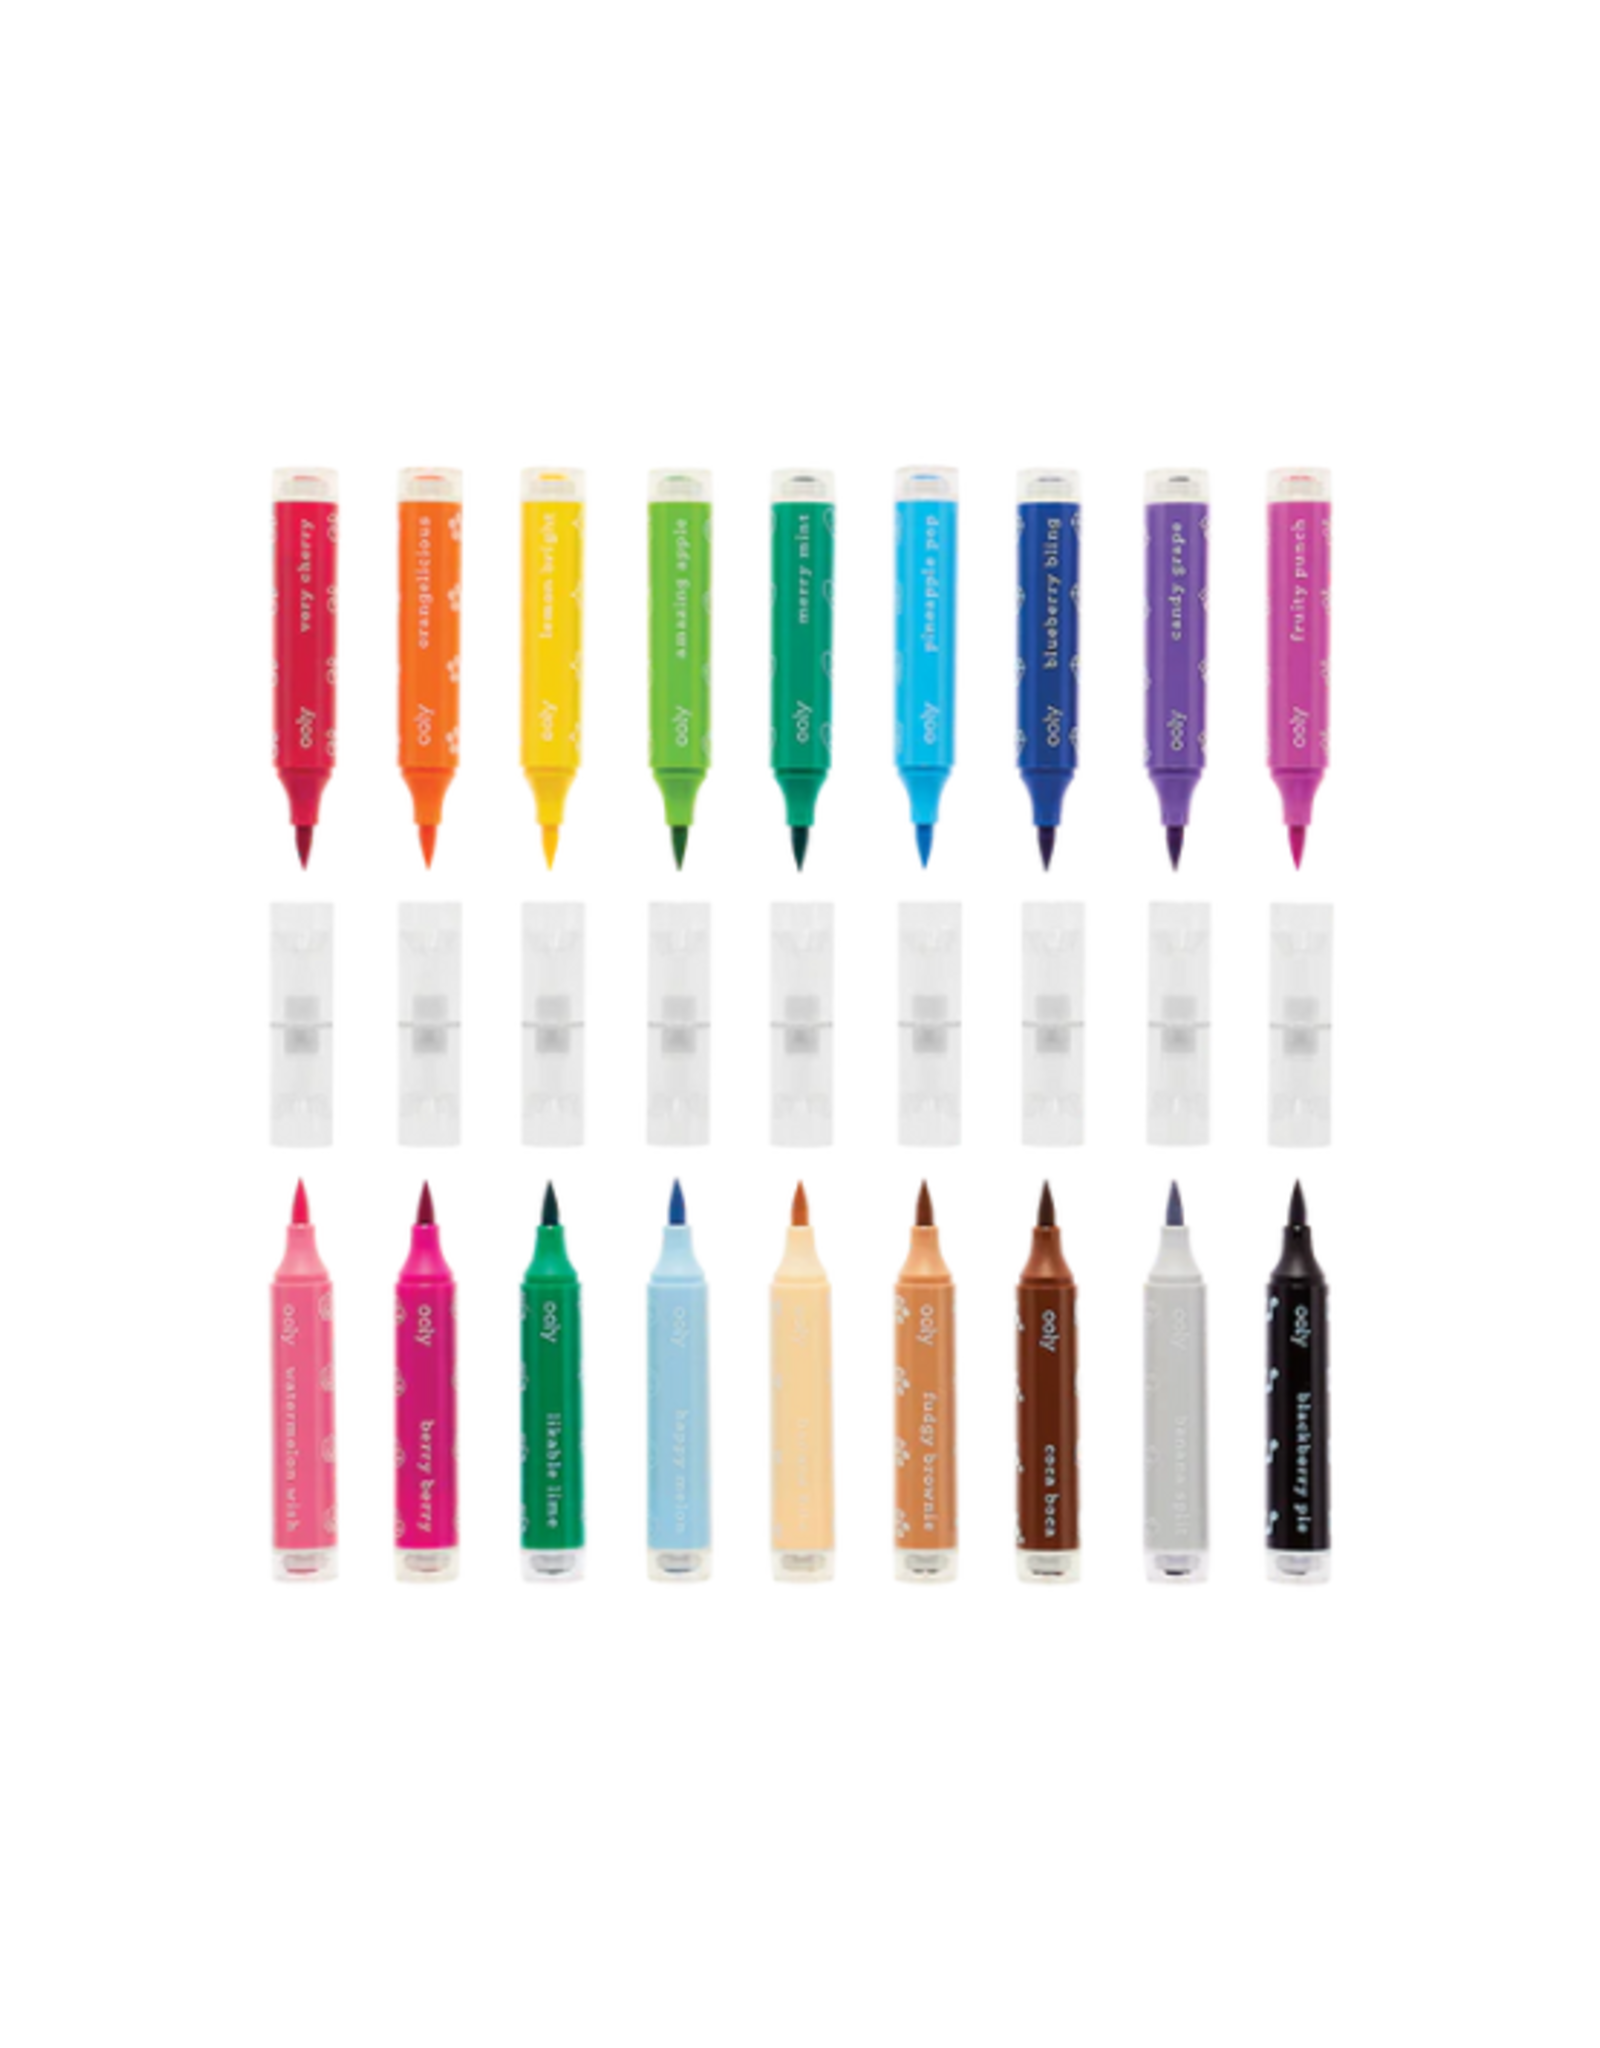 Ooly Ooly - Stampables Double-Ended Stamp Markers